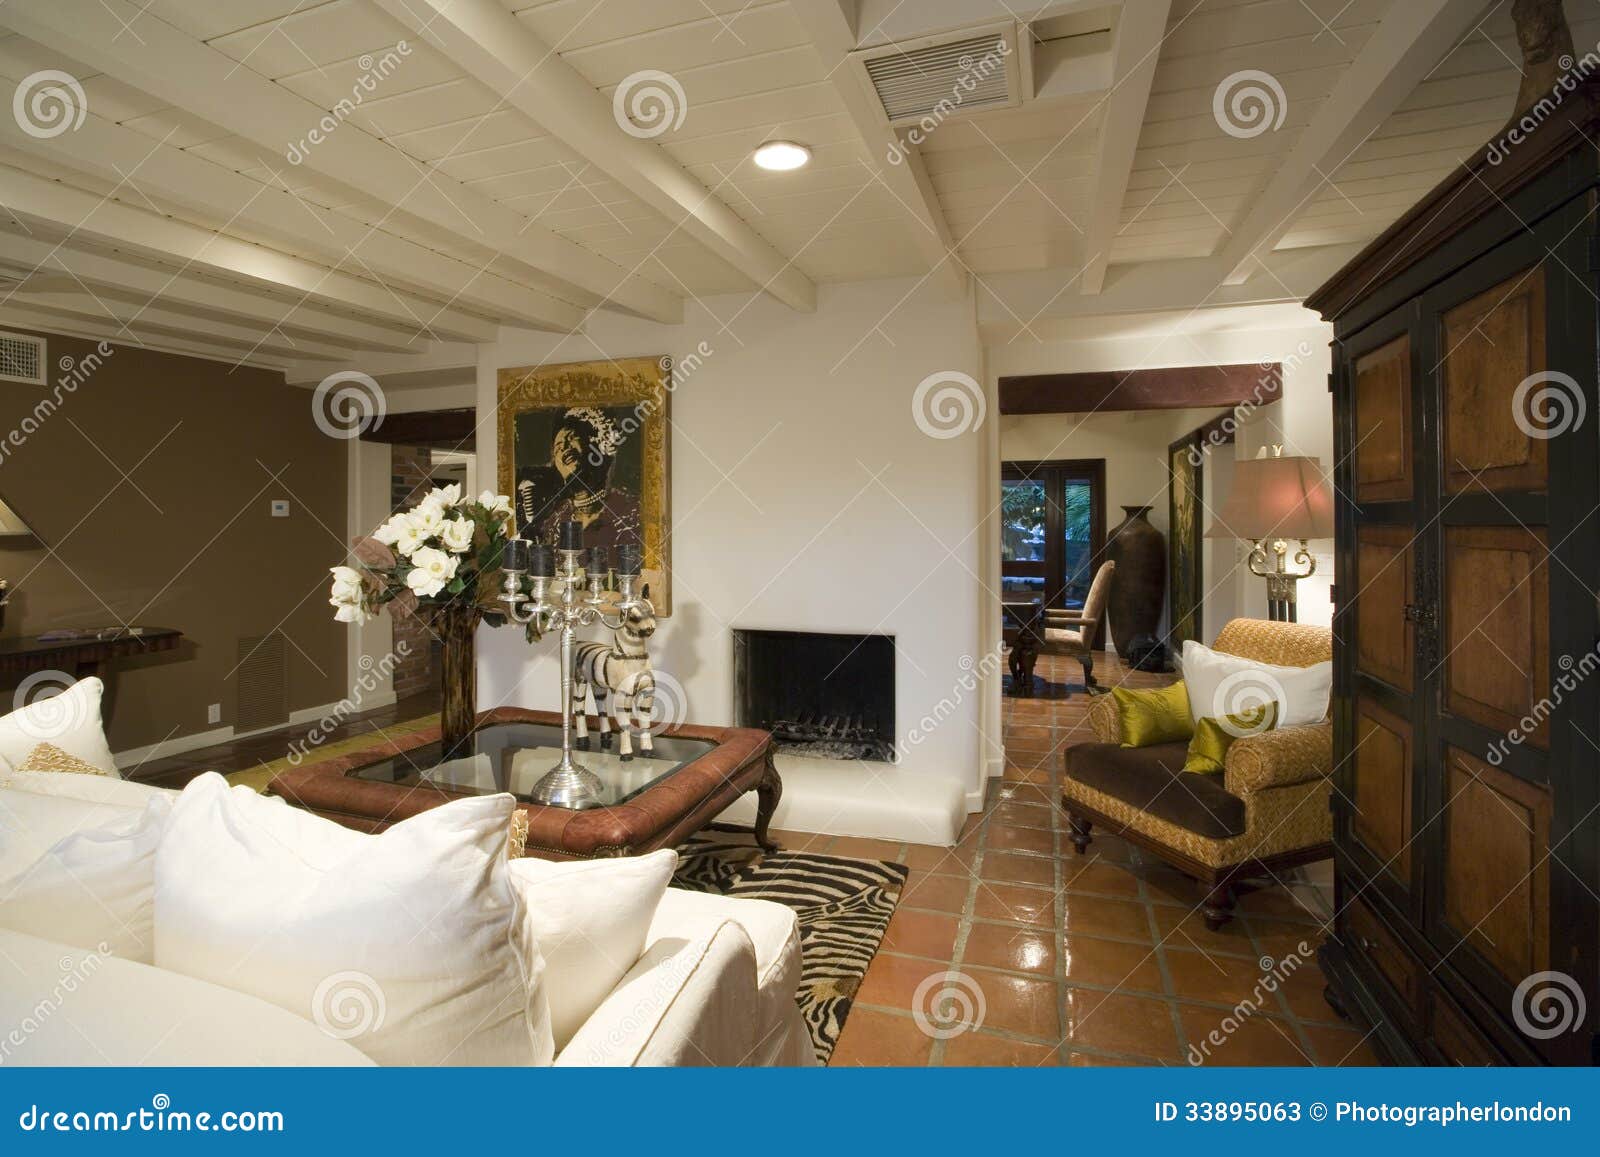 Old Fashioned Living Room In House Stock Photos Image 33895063